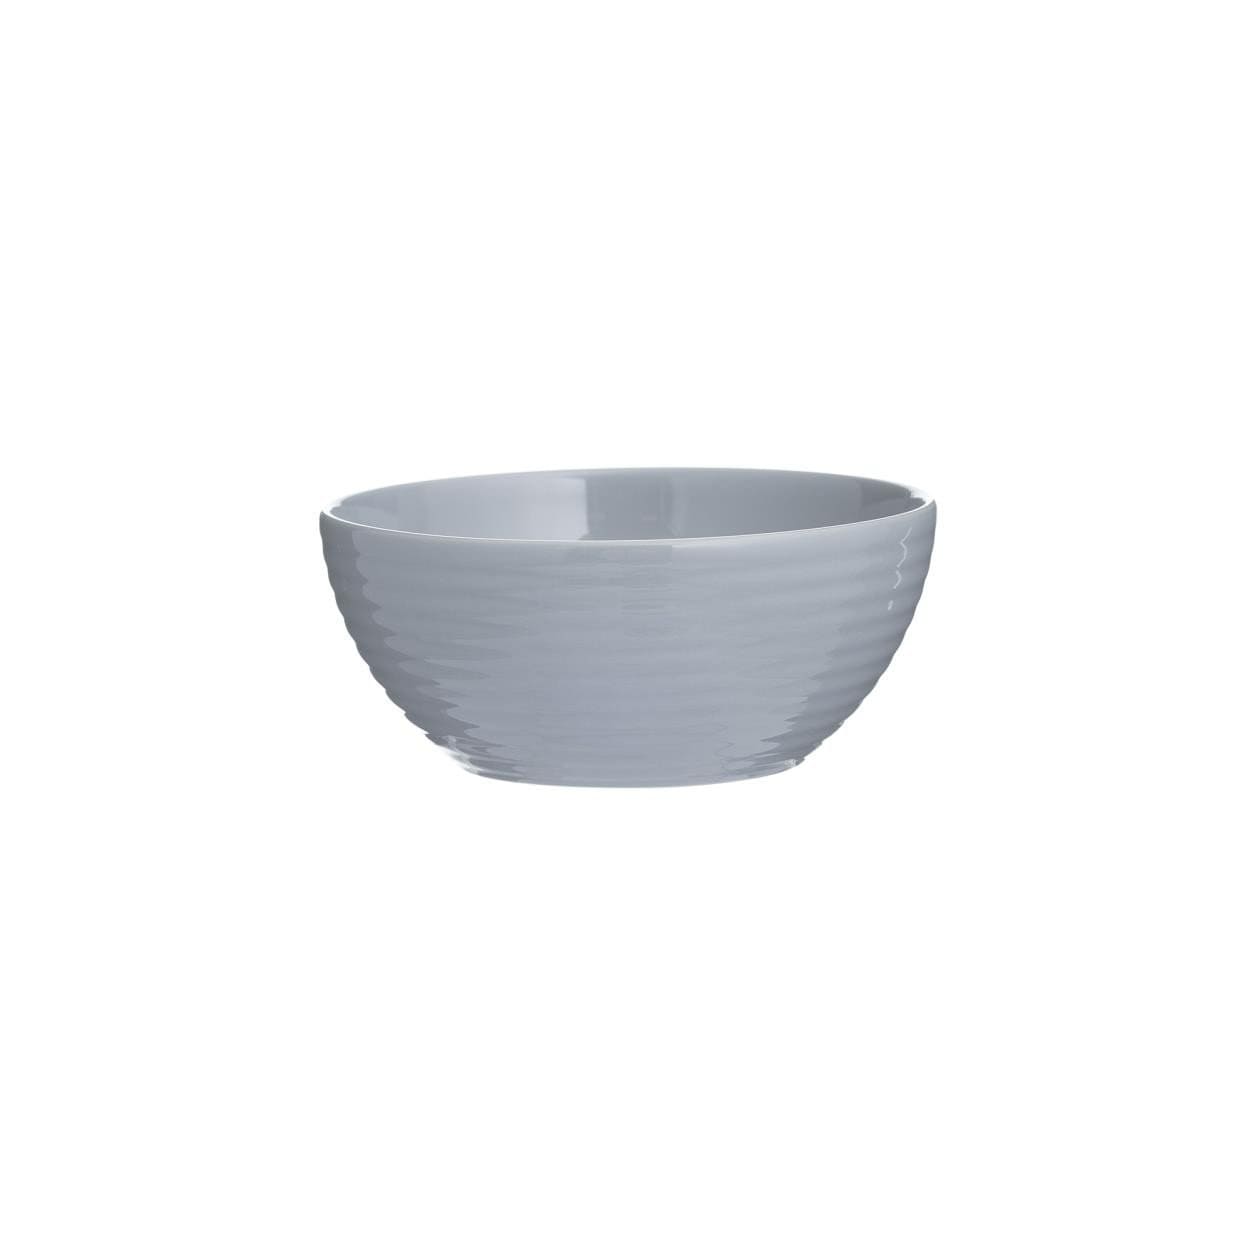 Kitchenware  -  Typhoon Living Grey Cereal Bowl  -  50154057